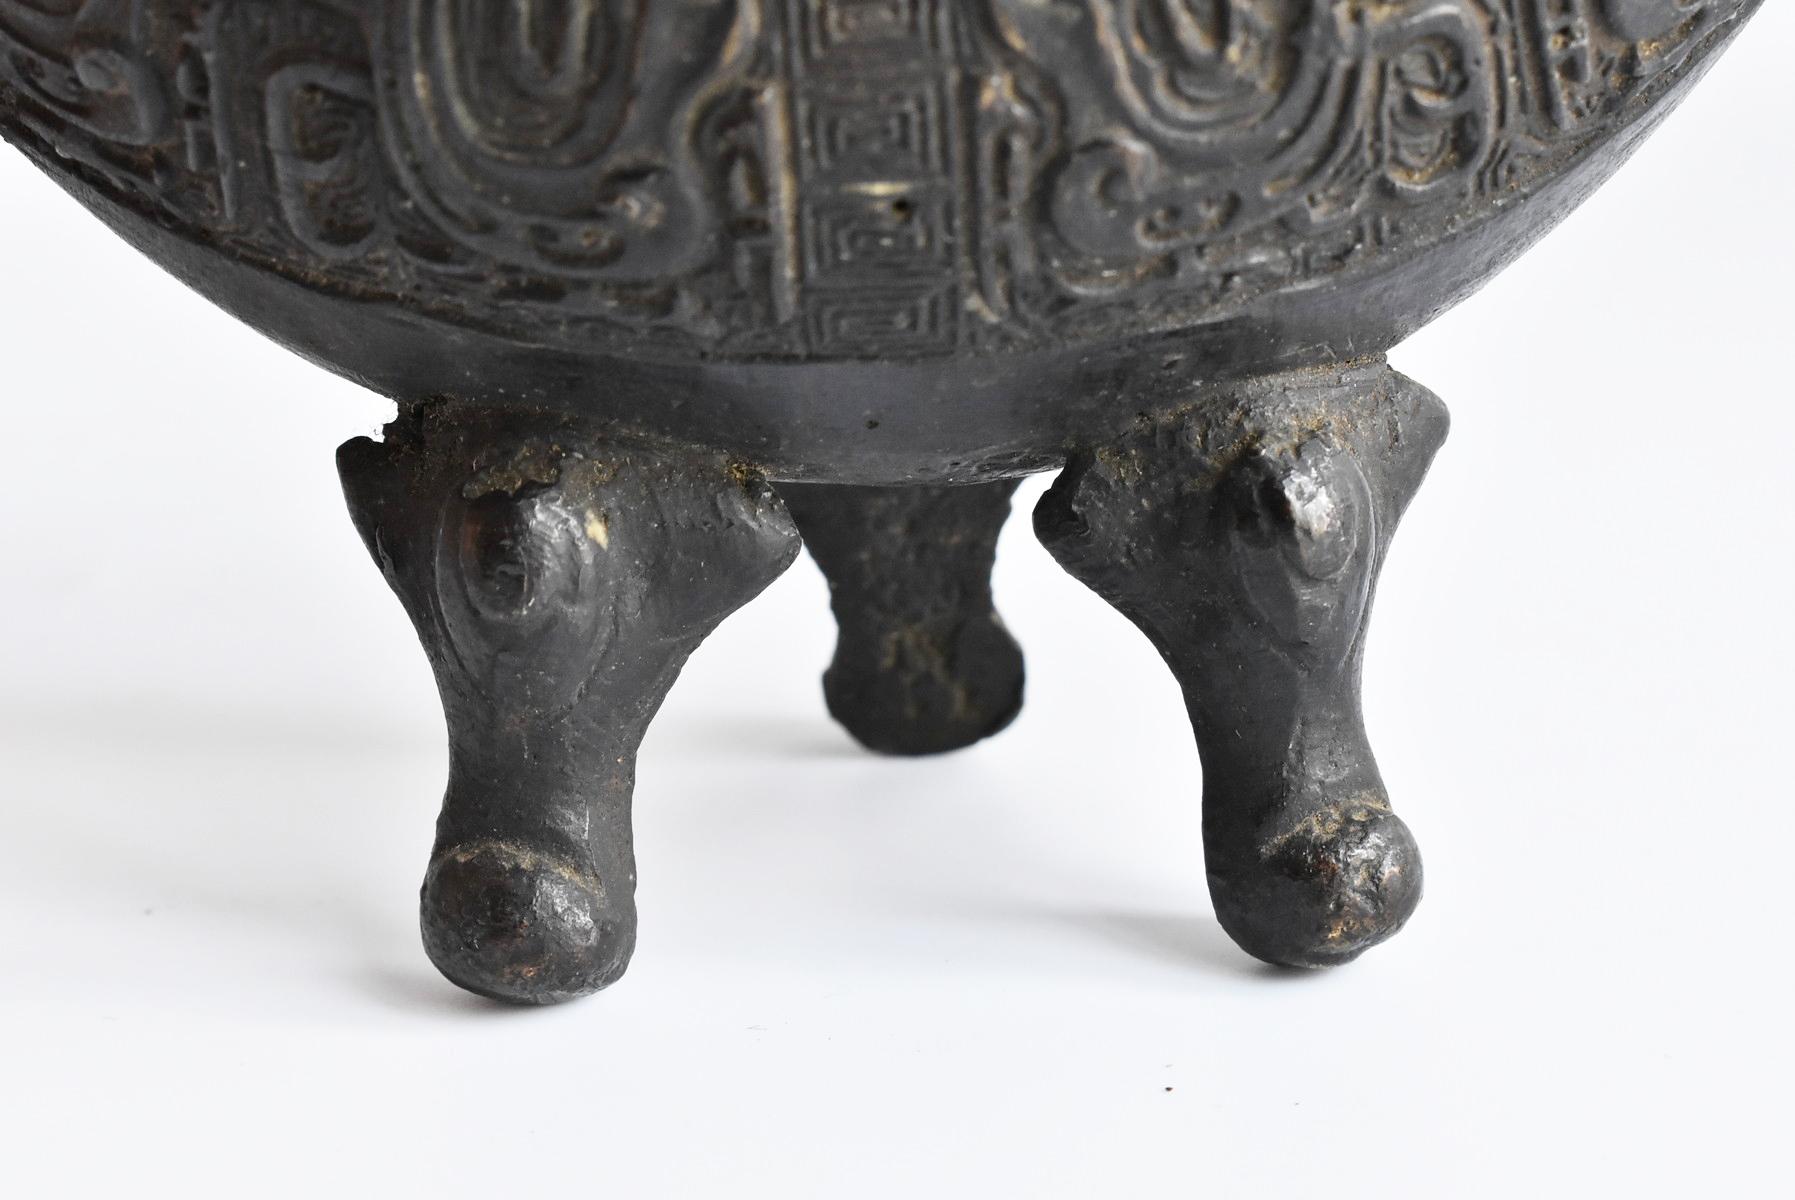 Chinese Old Brass Small Three-Legged Incense Burner 1700s-1800s / Small Incens 9